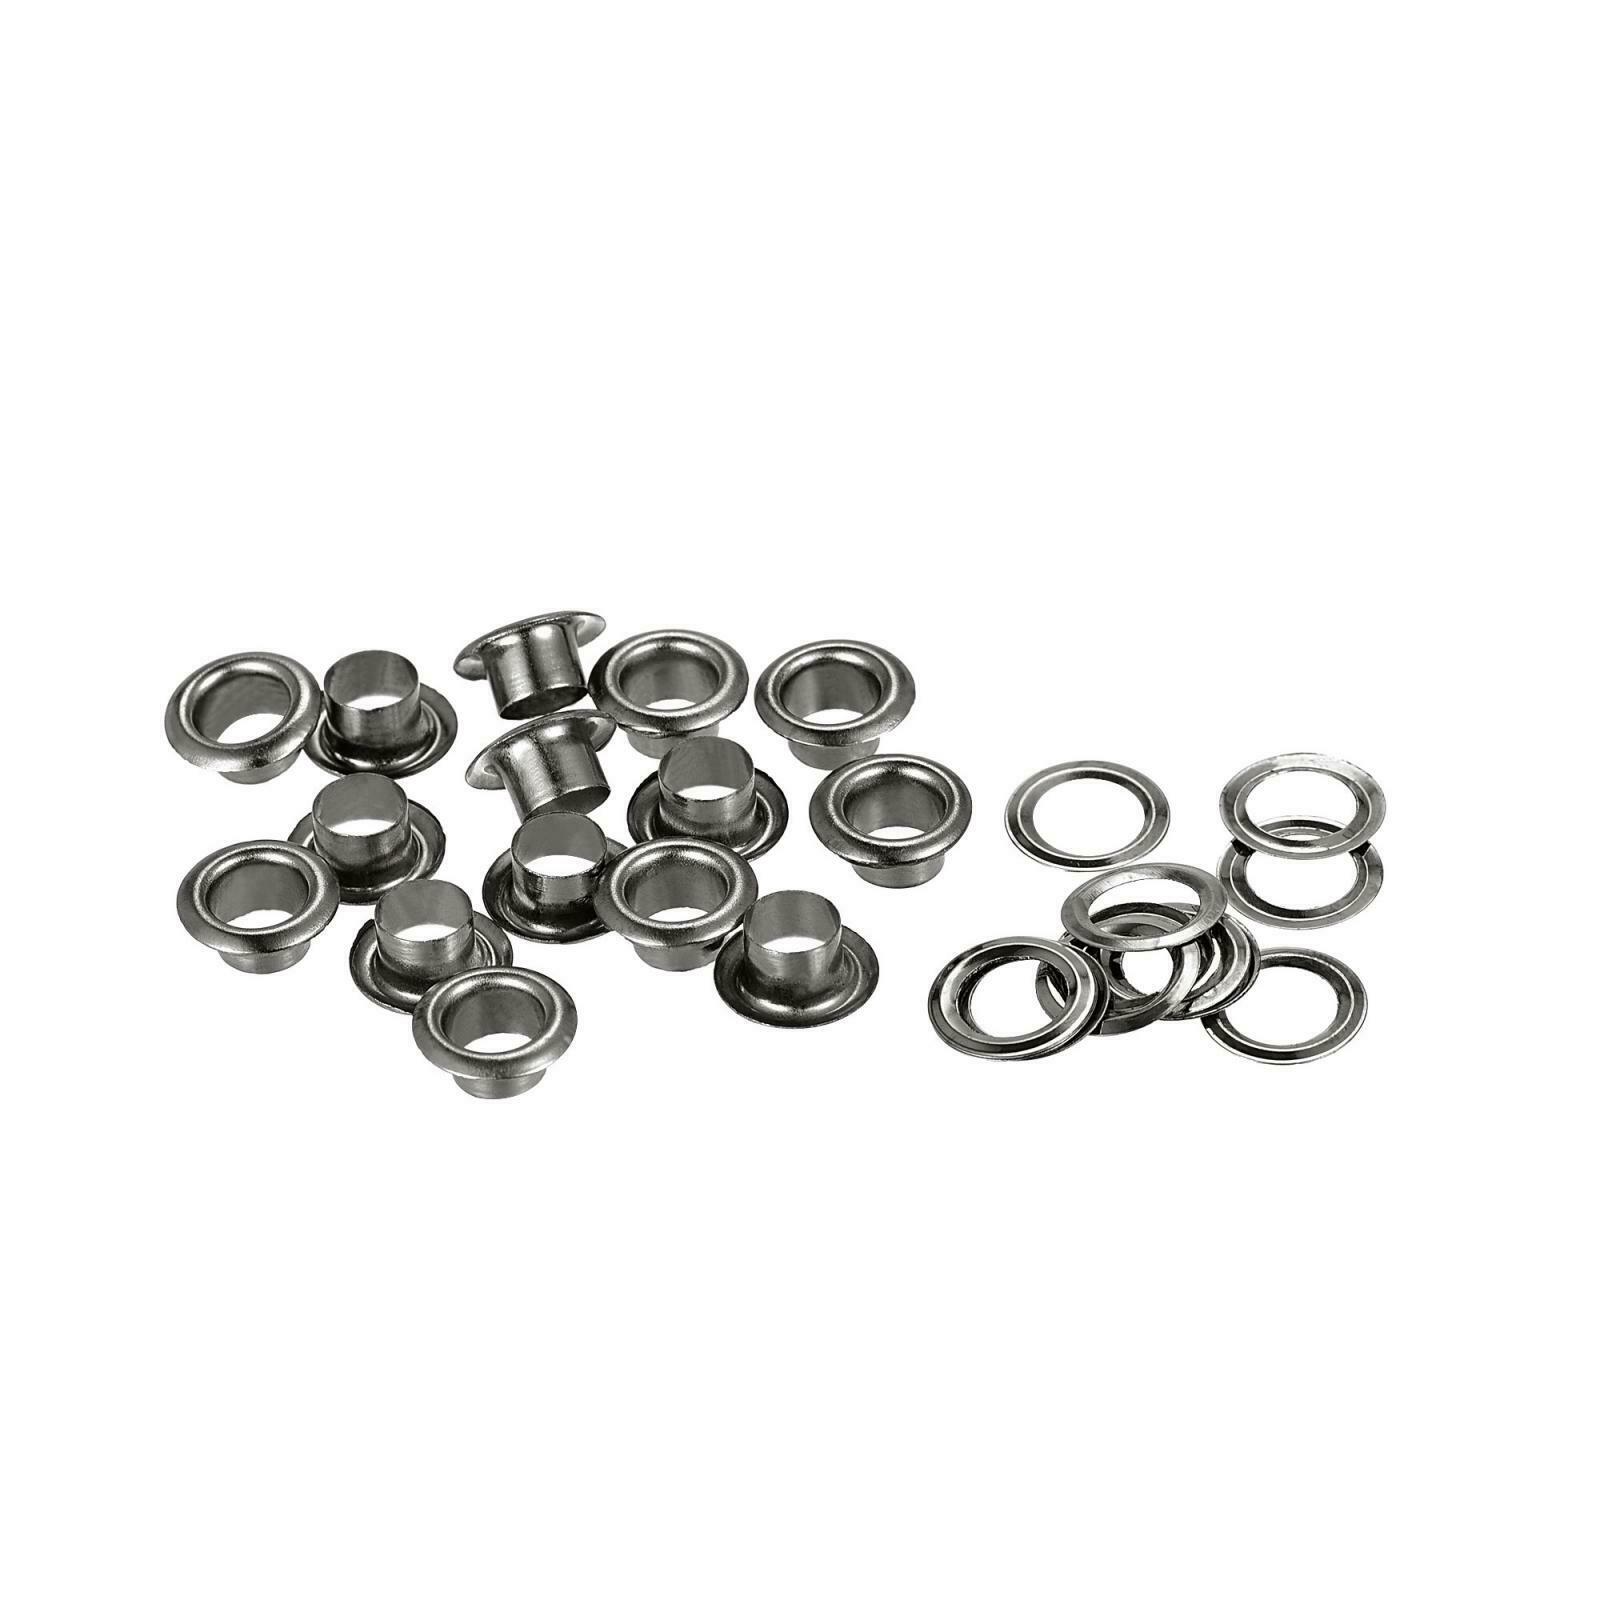 Eyelets With Washers, 11 X 6 X 5mm Iron Hollow Rivets Grommets Black 300 Set